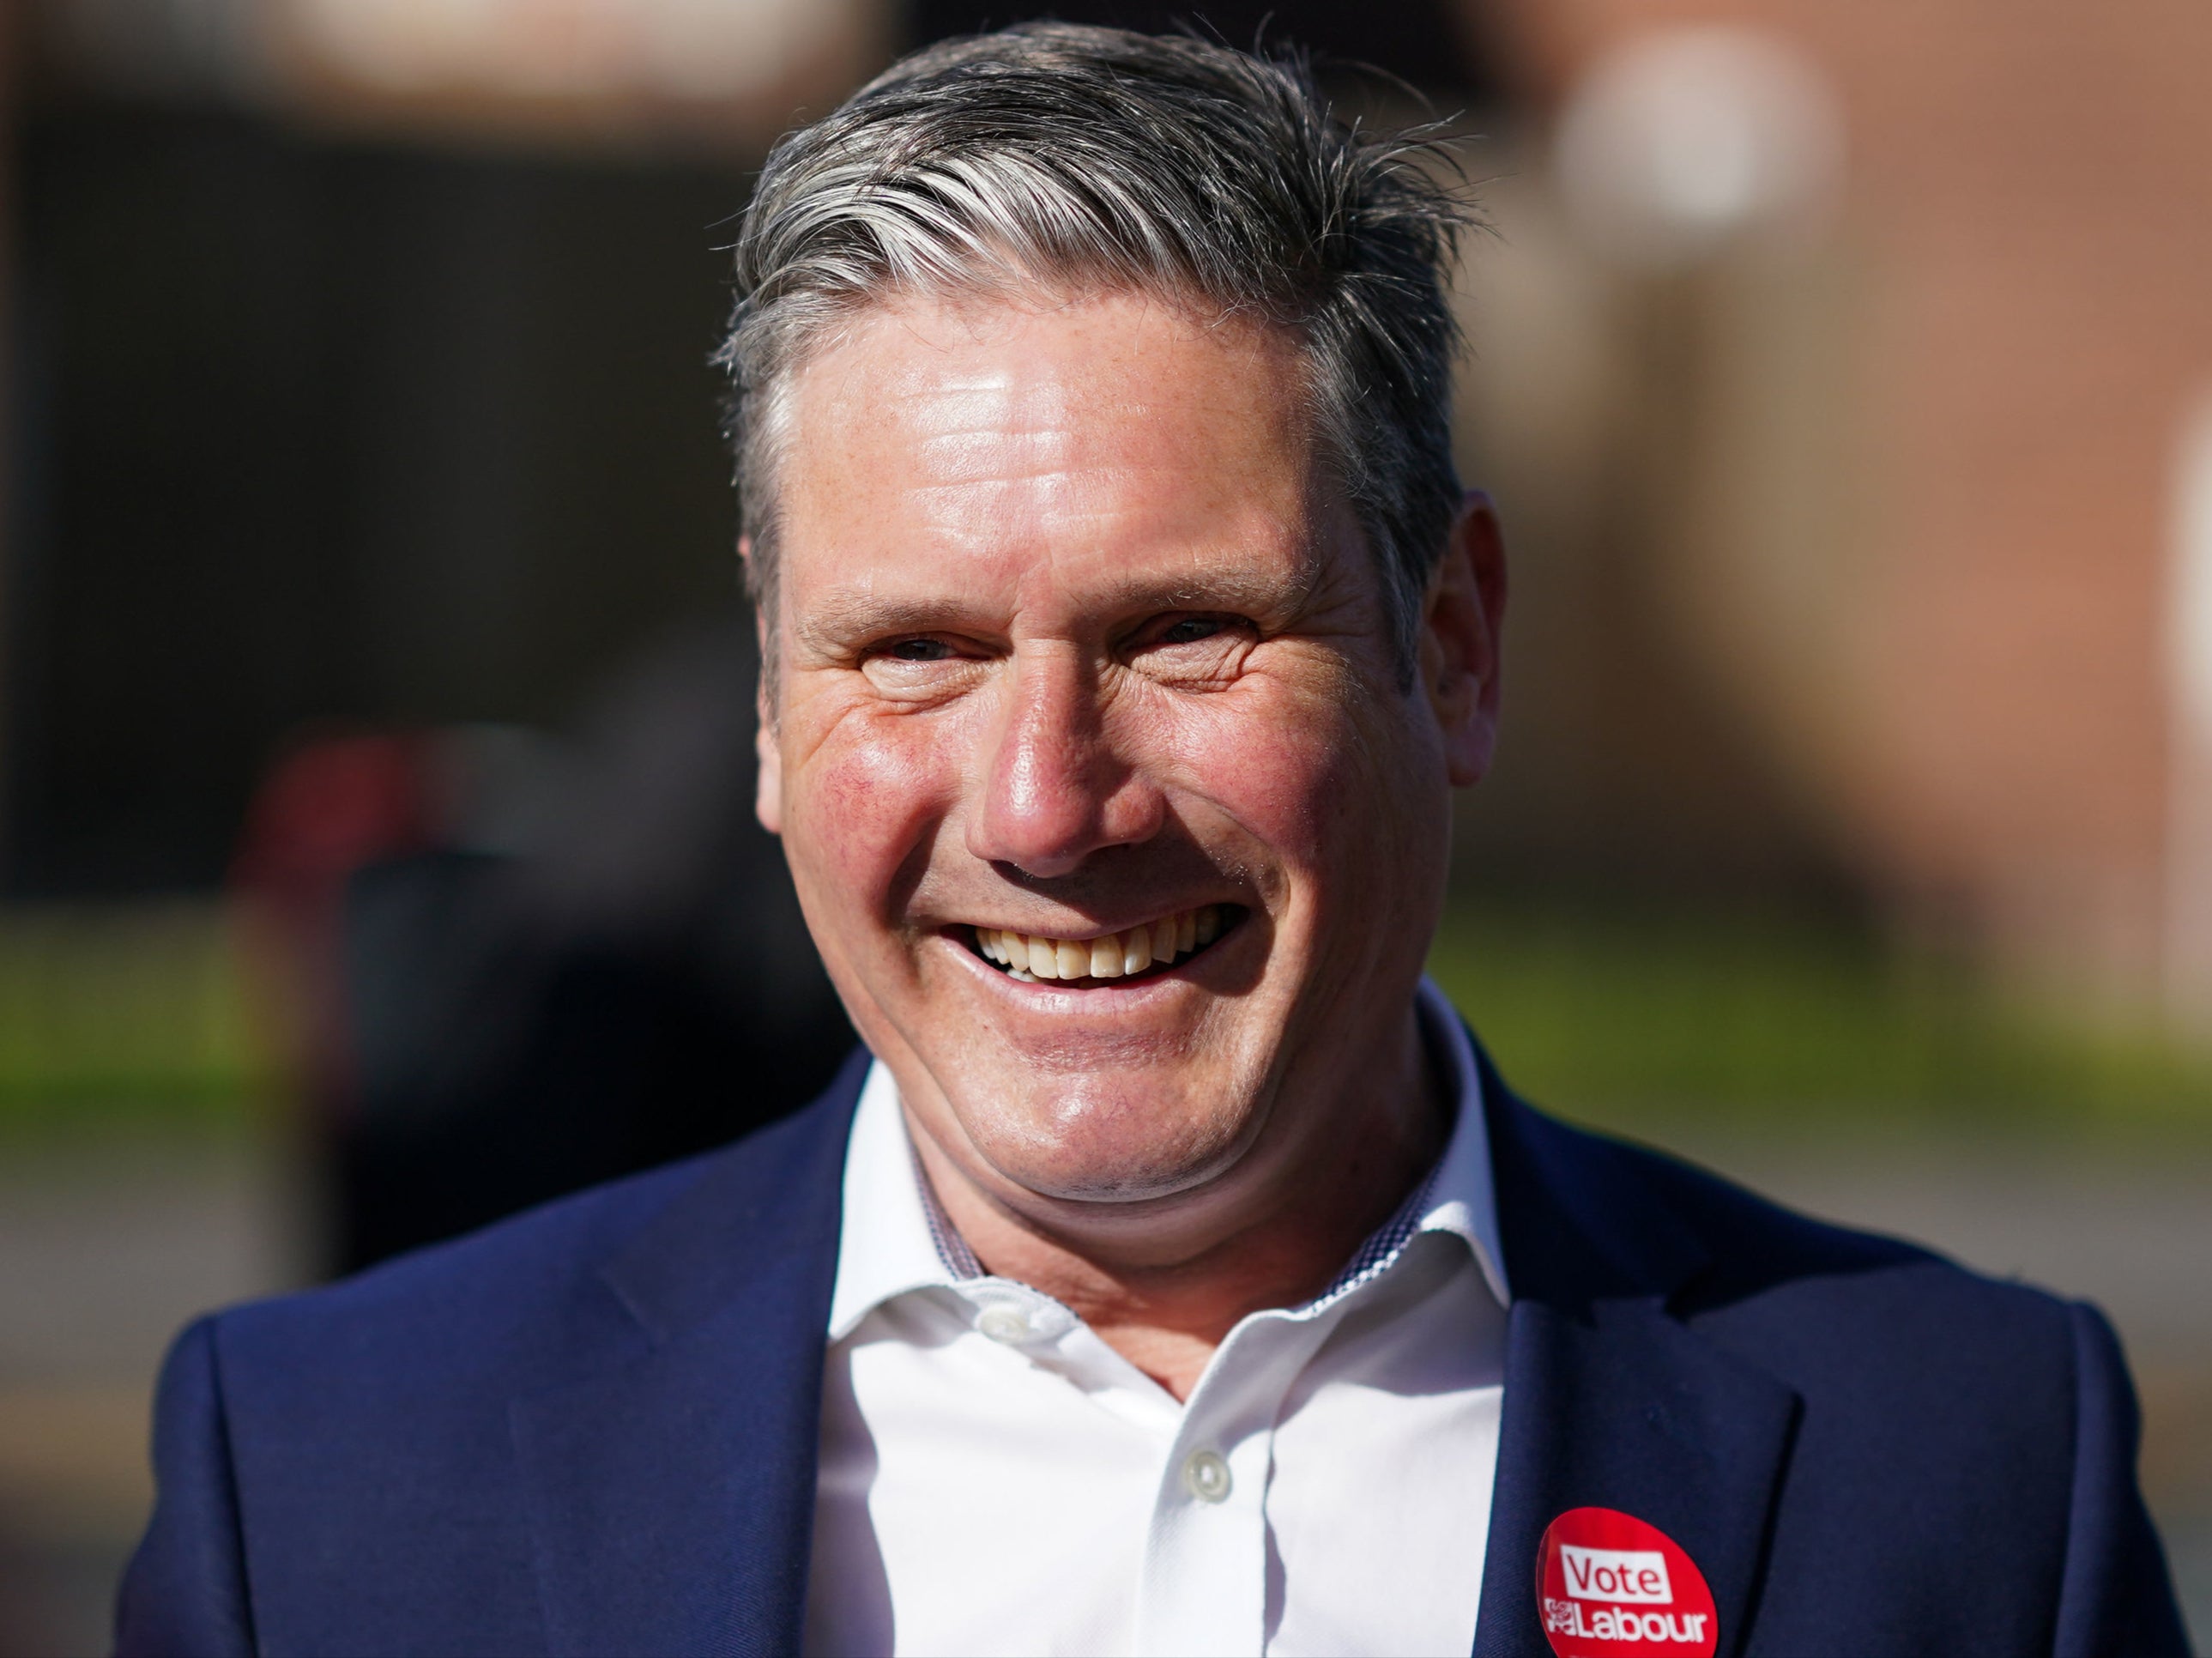 There have been many questions for Keir Starmer, the Labour leader, about his party’s future